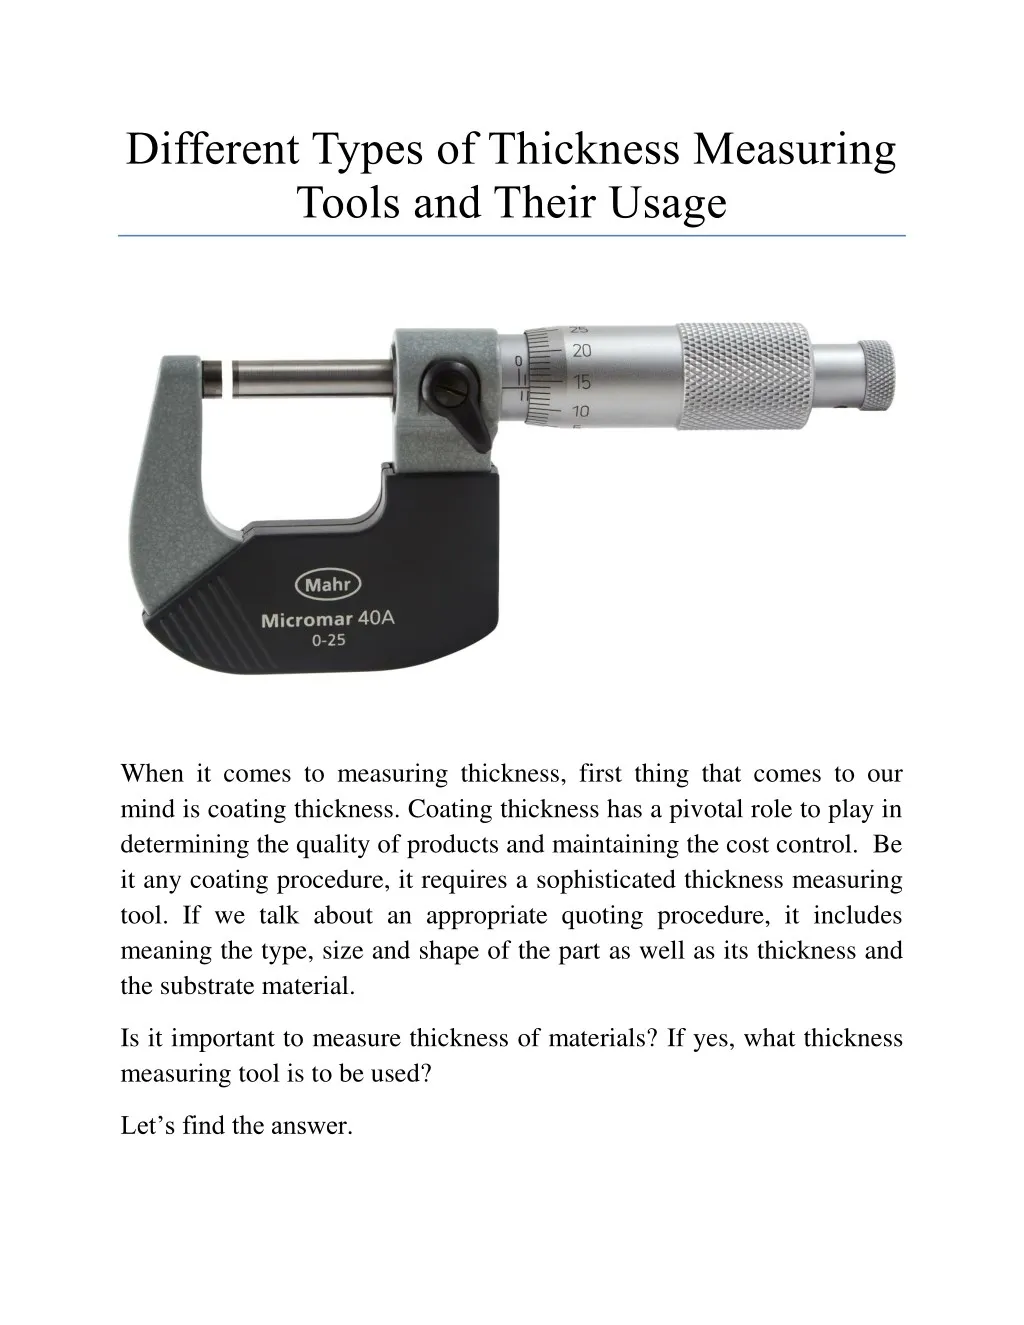 different types of thickness measuring tools